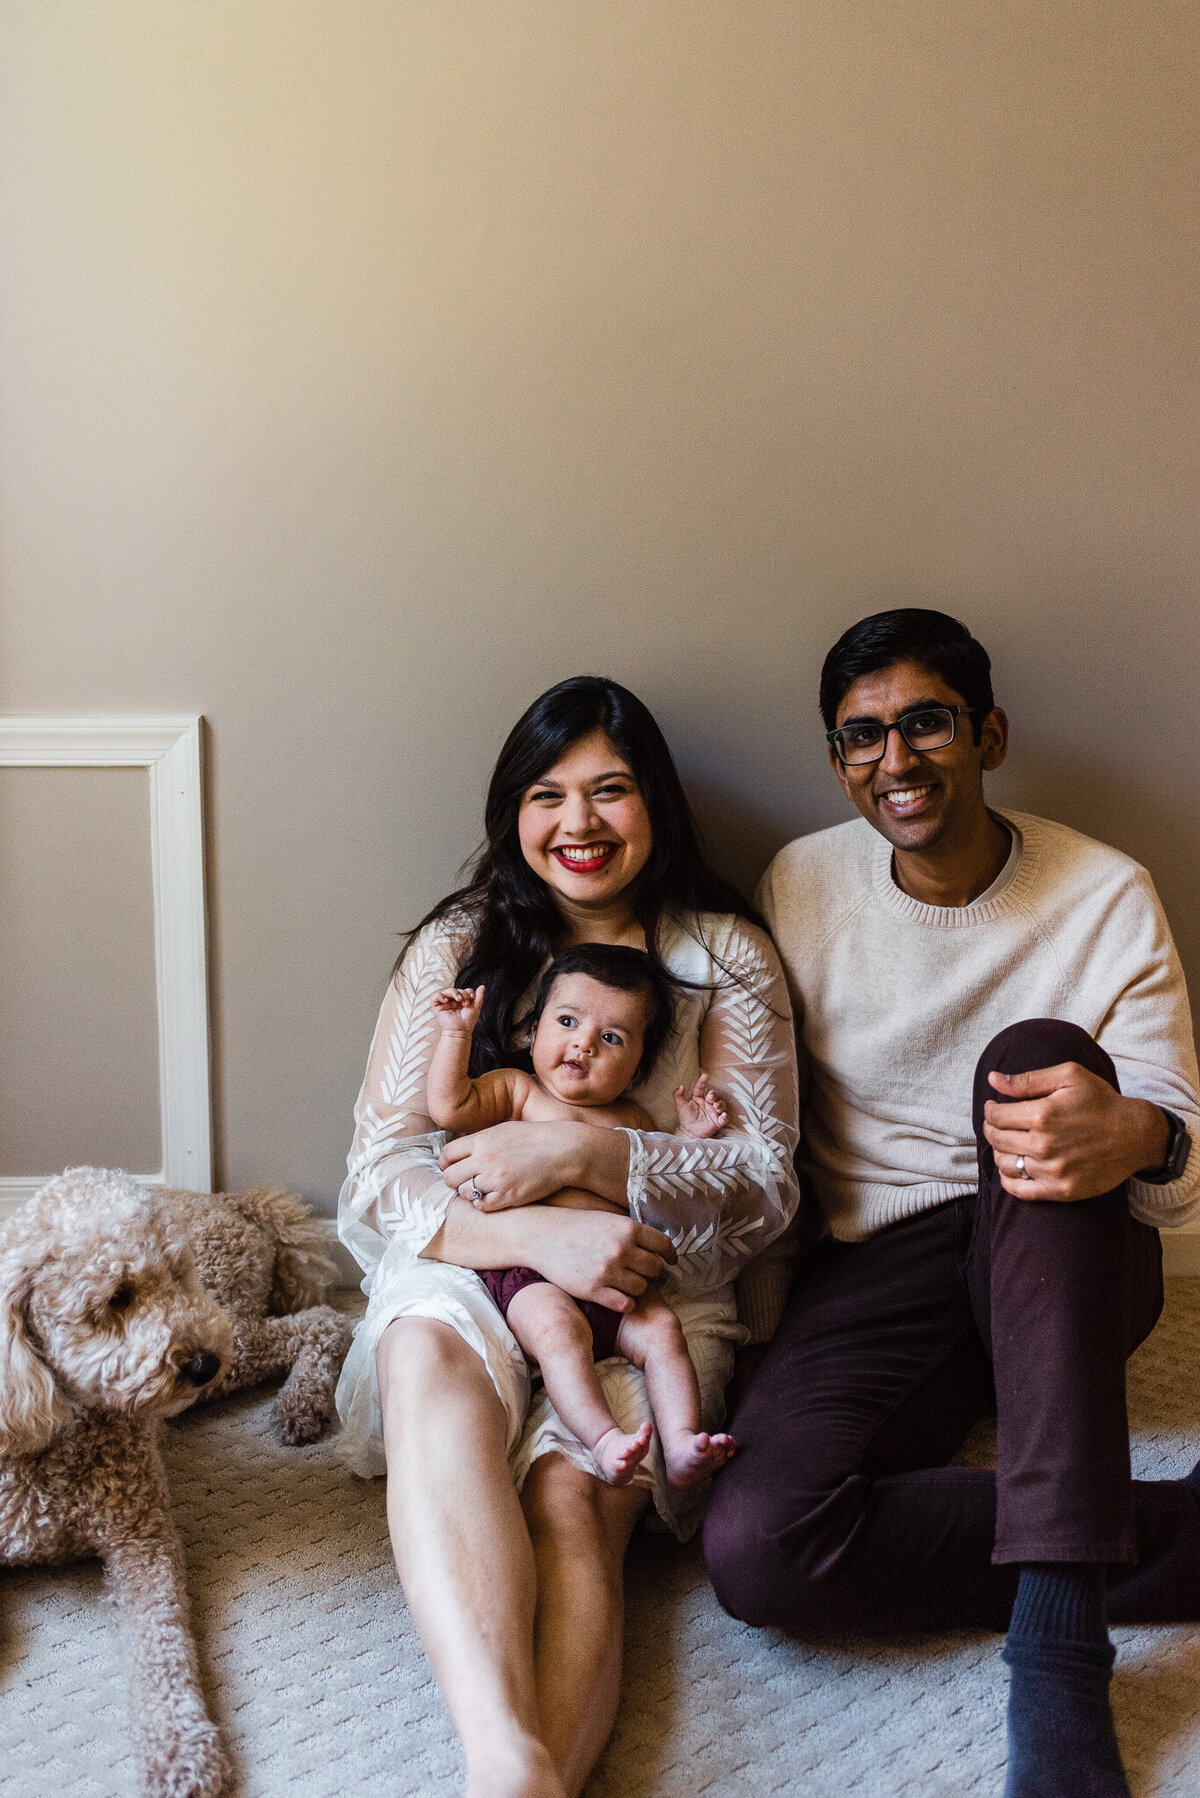 newborn photos of family with baby girl and dog in their home in Reston VA